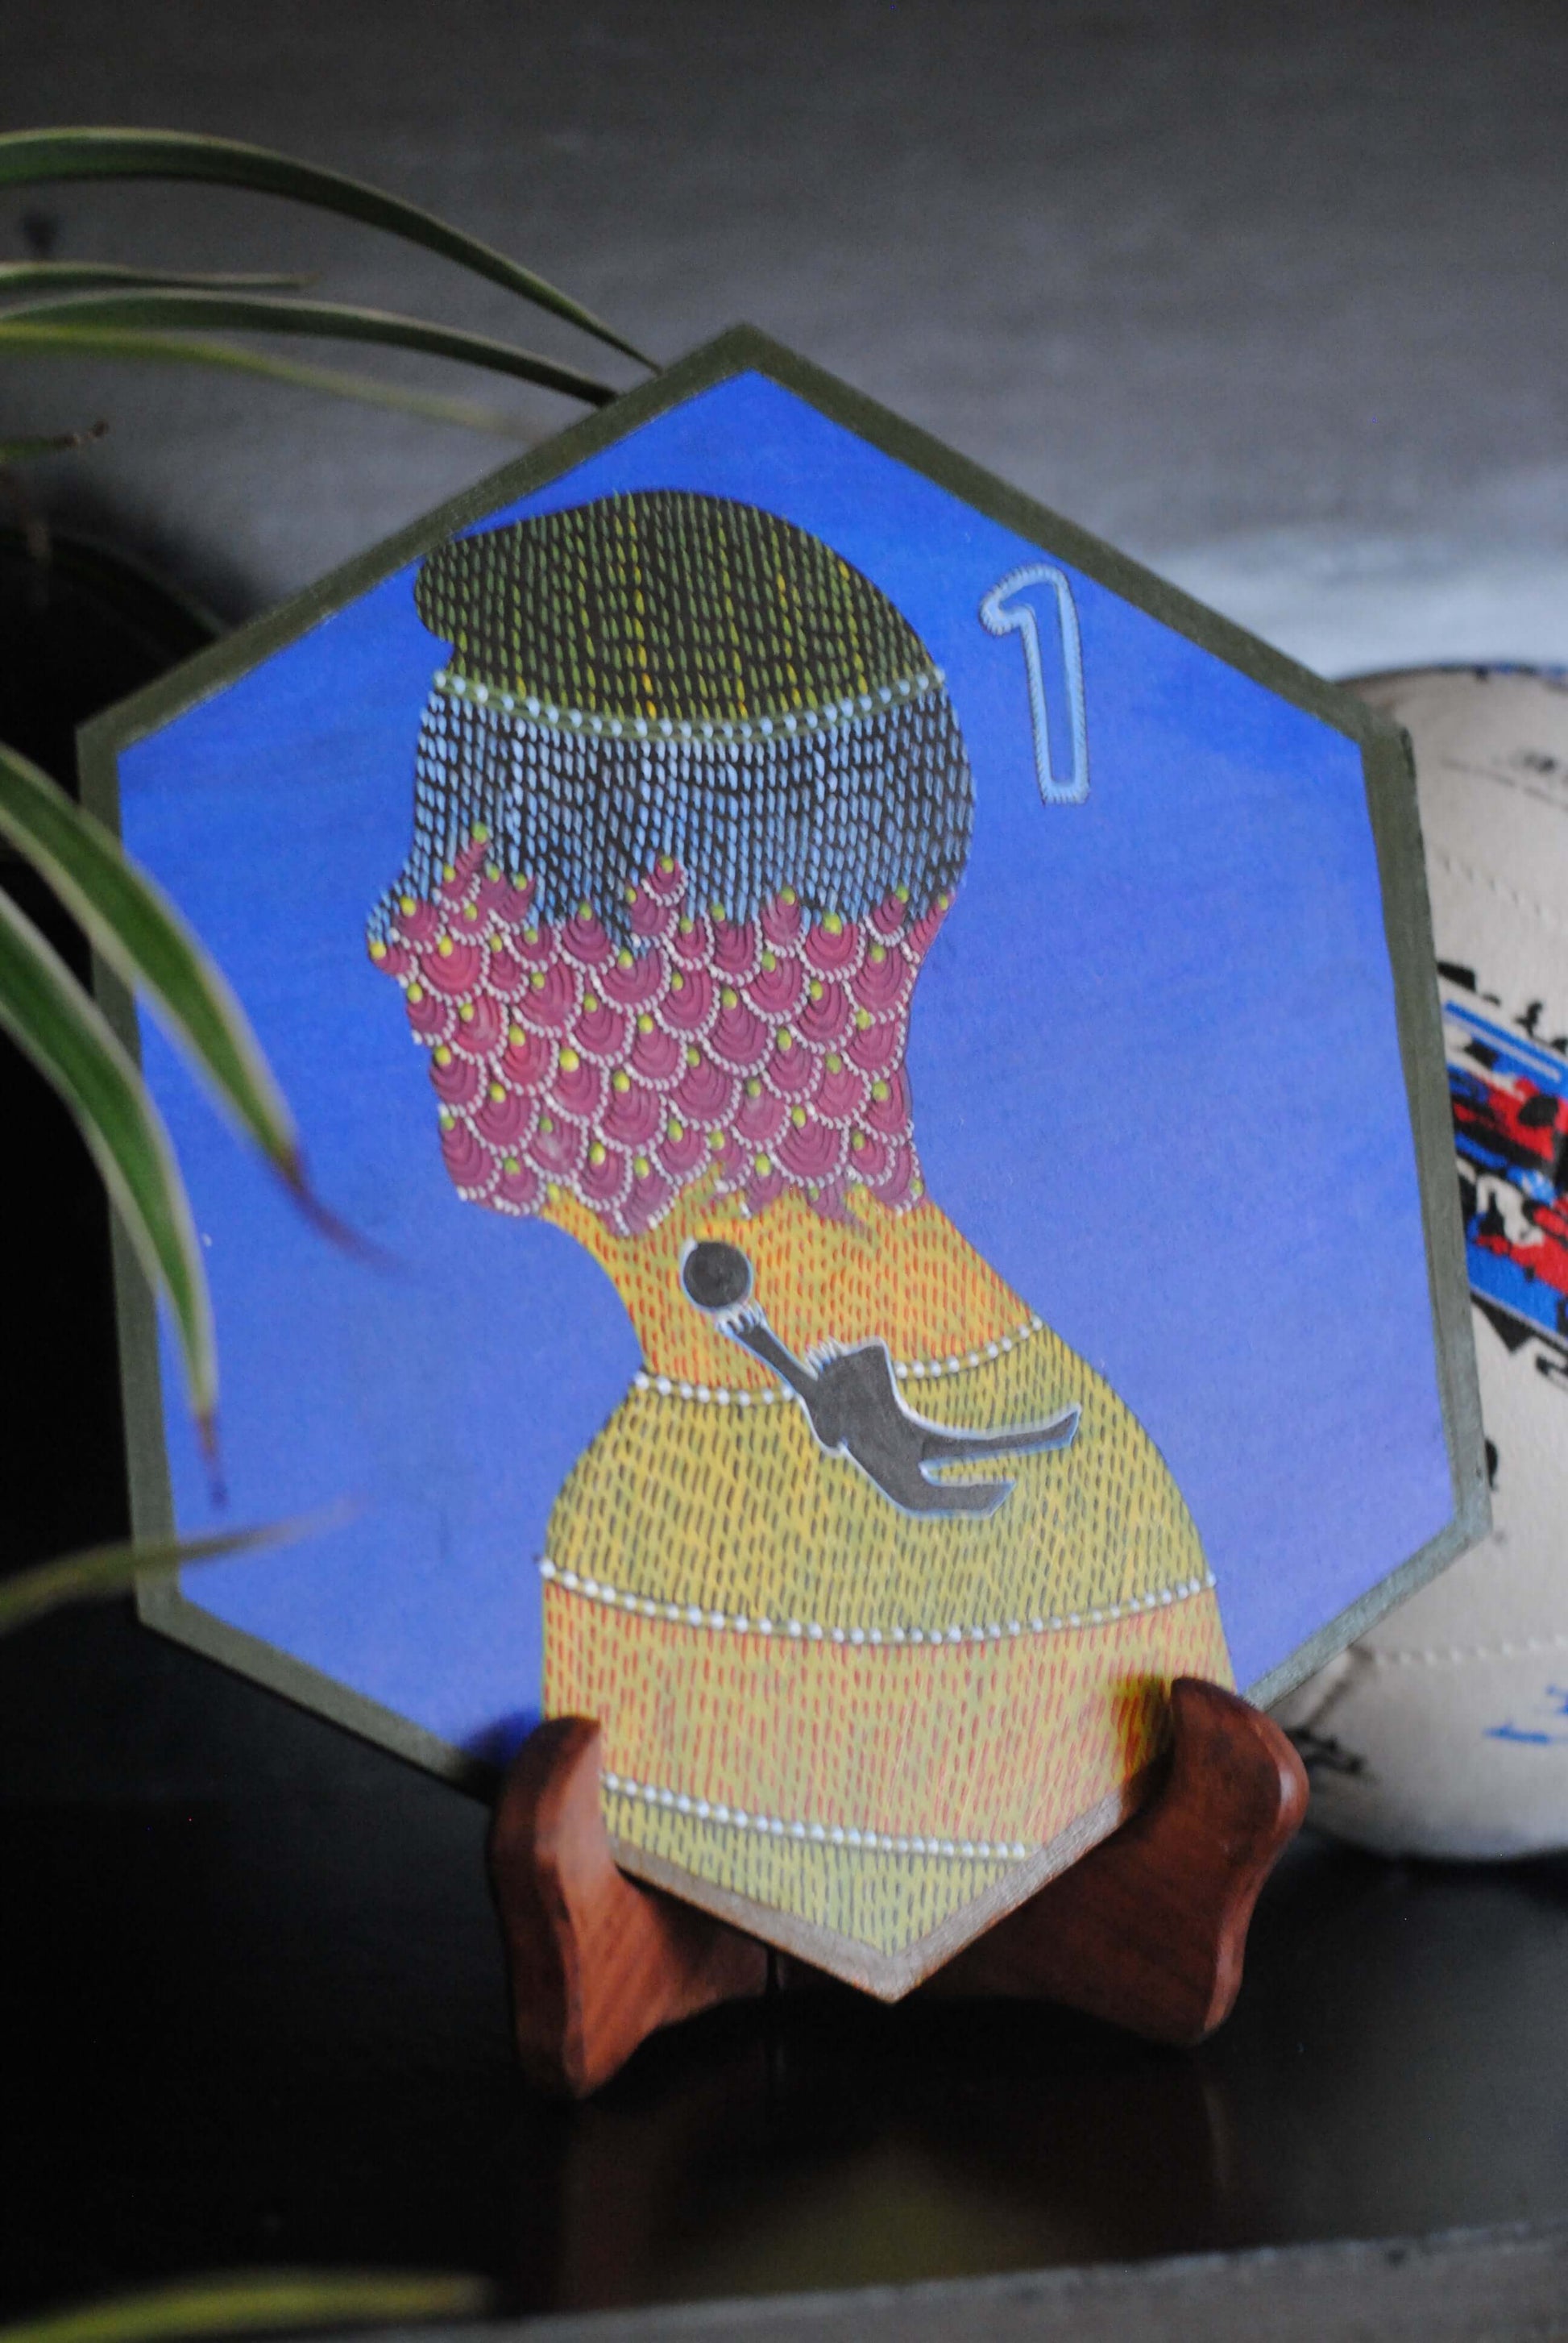 Copper enameled wallplates to celebrate FIFA legacies, Manuel Neuer in Gond art. With The Plated Project